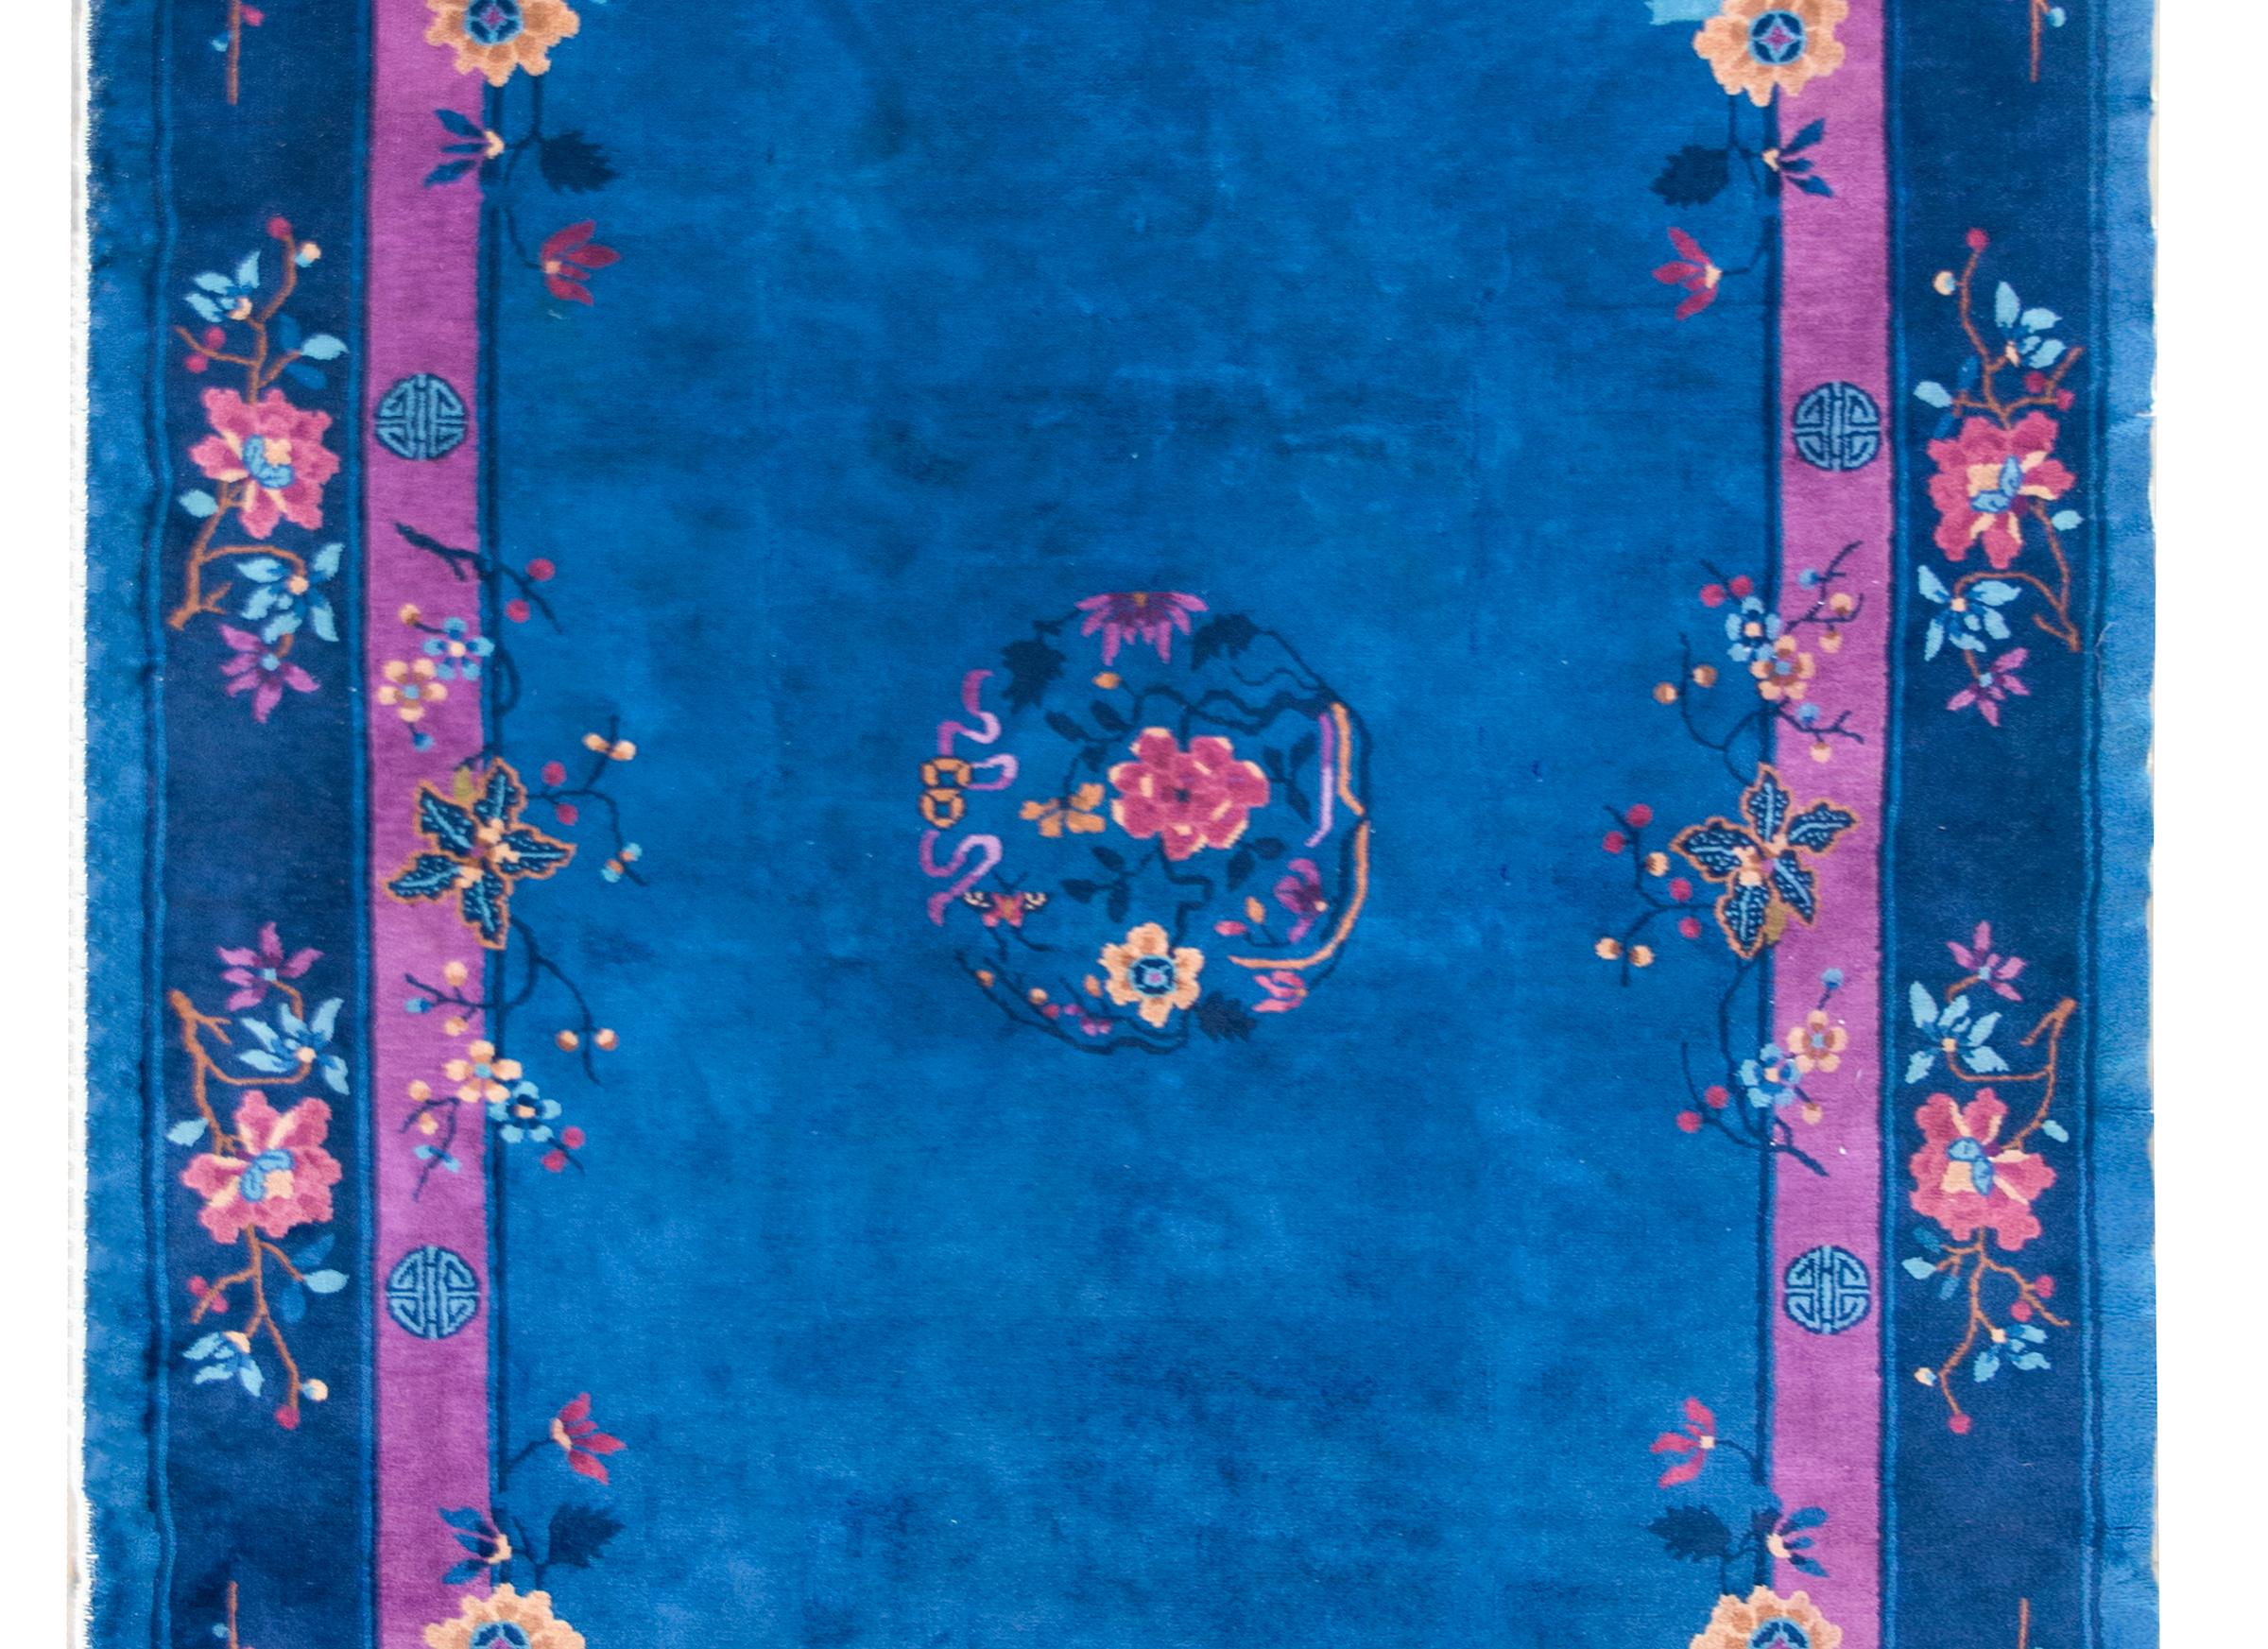 An early 20th century Chinese Art Deco rug with a central floral medallion with pink and fuchsia peonies, set against an indigo background, and surrounded by a wide border with a repeated peony pattern with Shou characters, a symbol is prosperity in